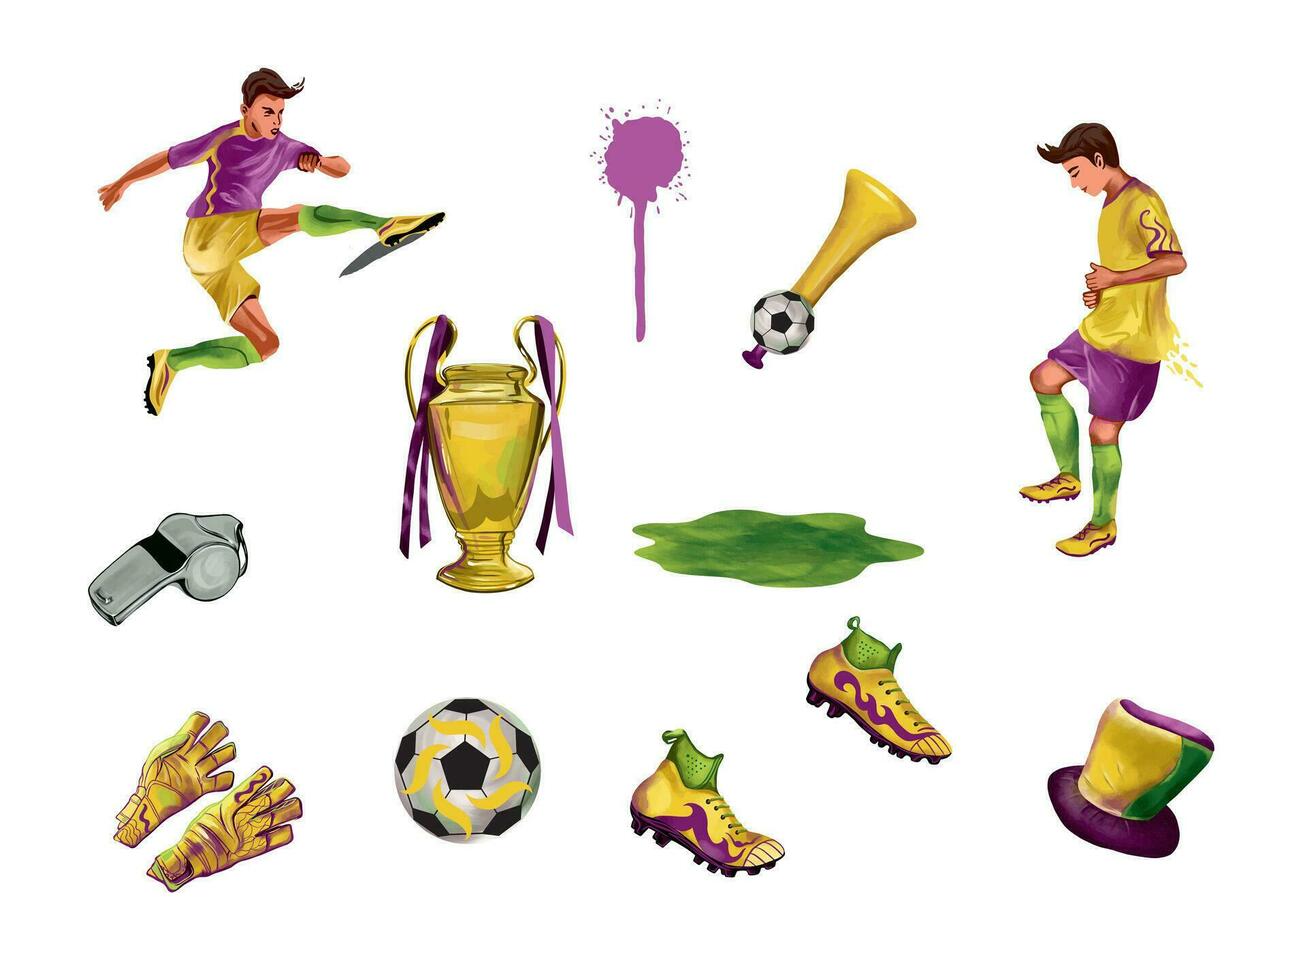 Football boots, ball, whistle, fan's hat and pipe, football players, champion cup, gloves. Vector illustration of football set. Design element for sports banners, flyers, invitations.